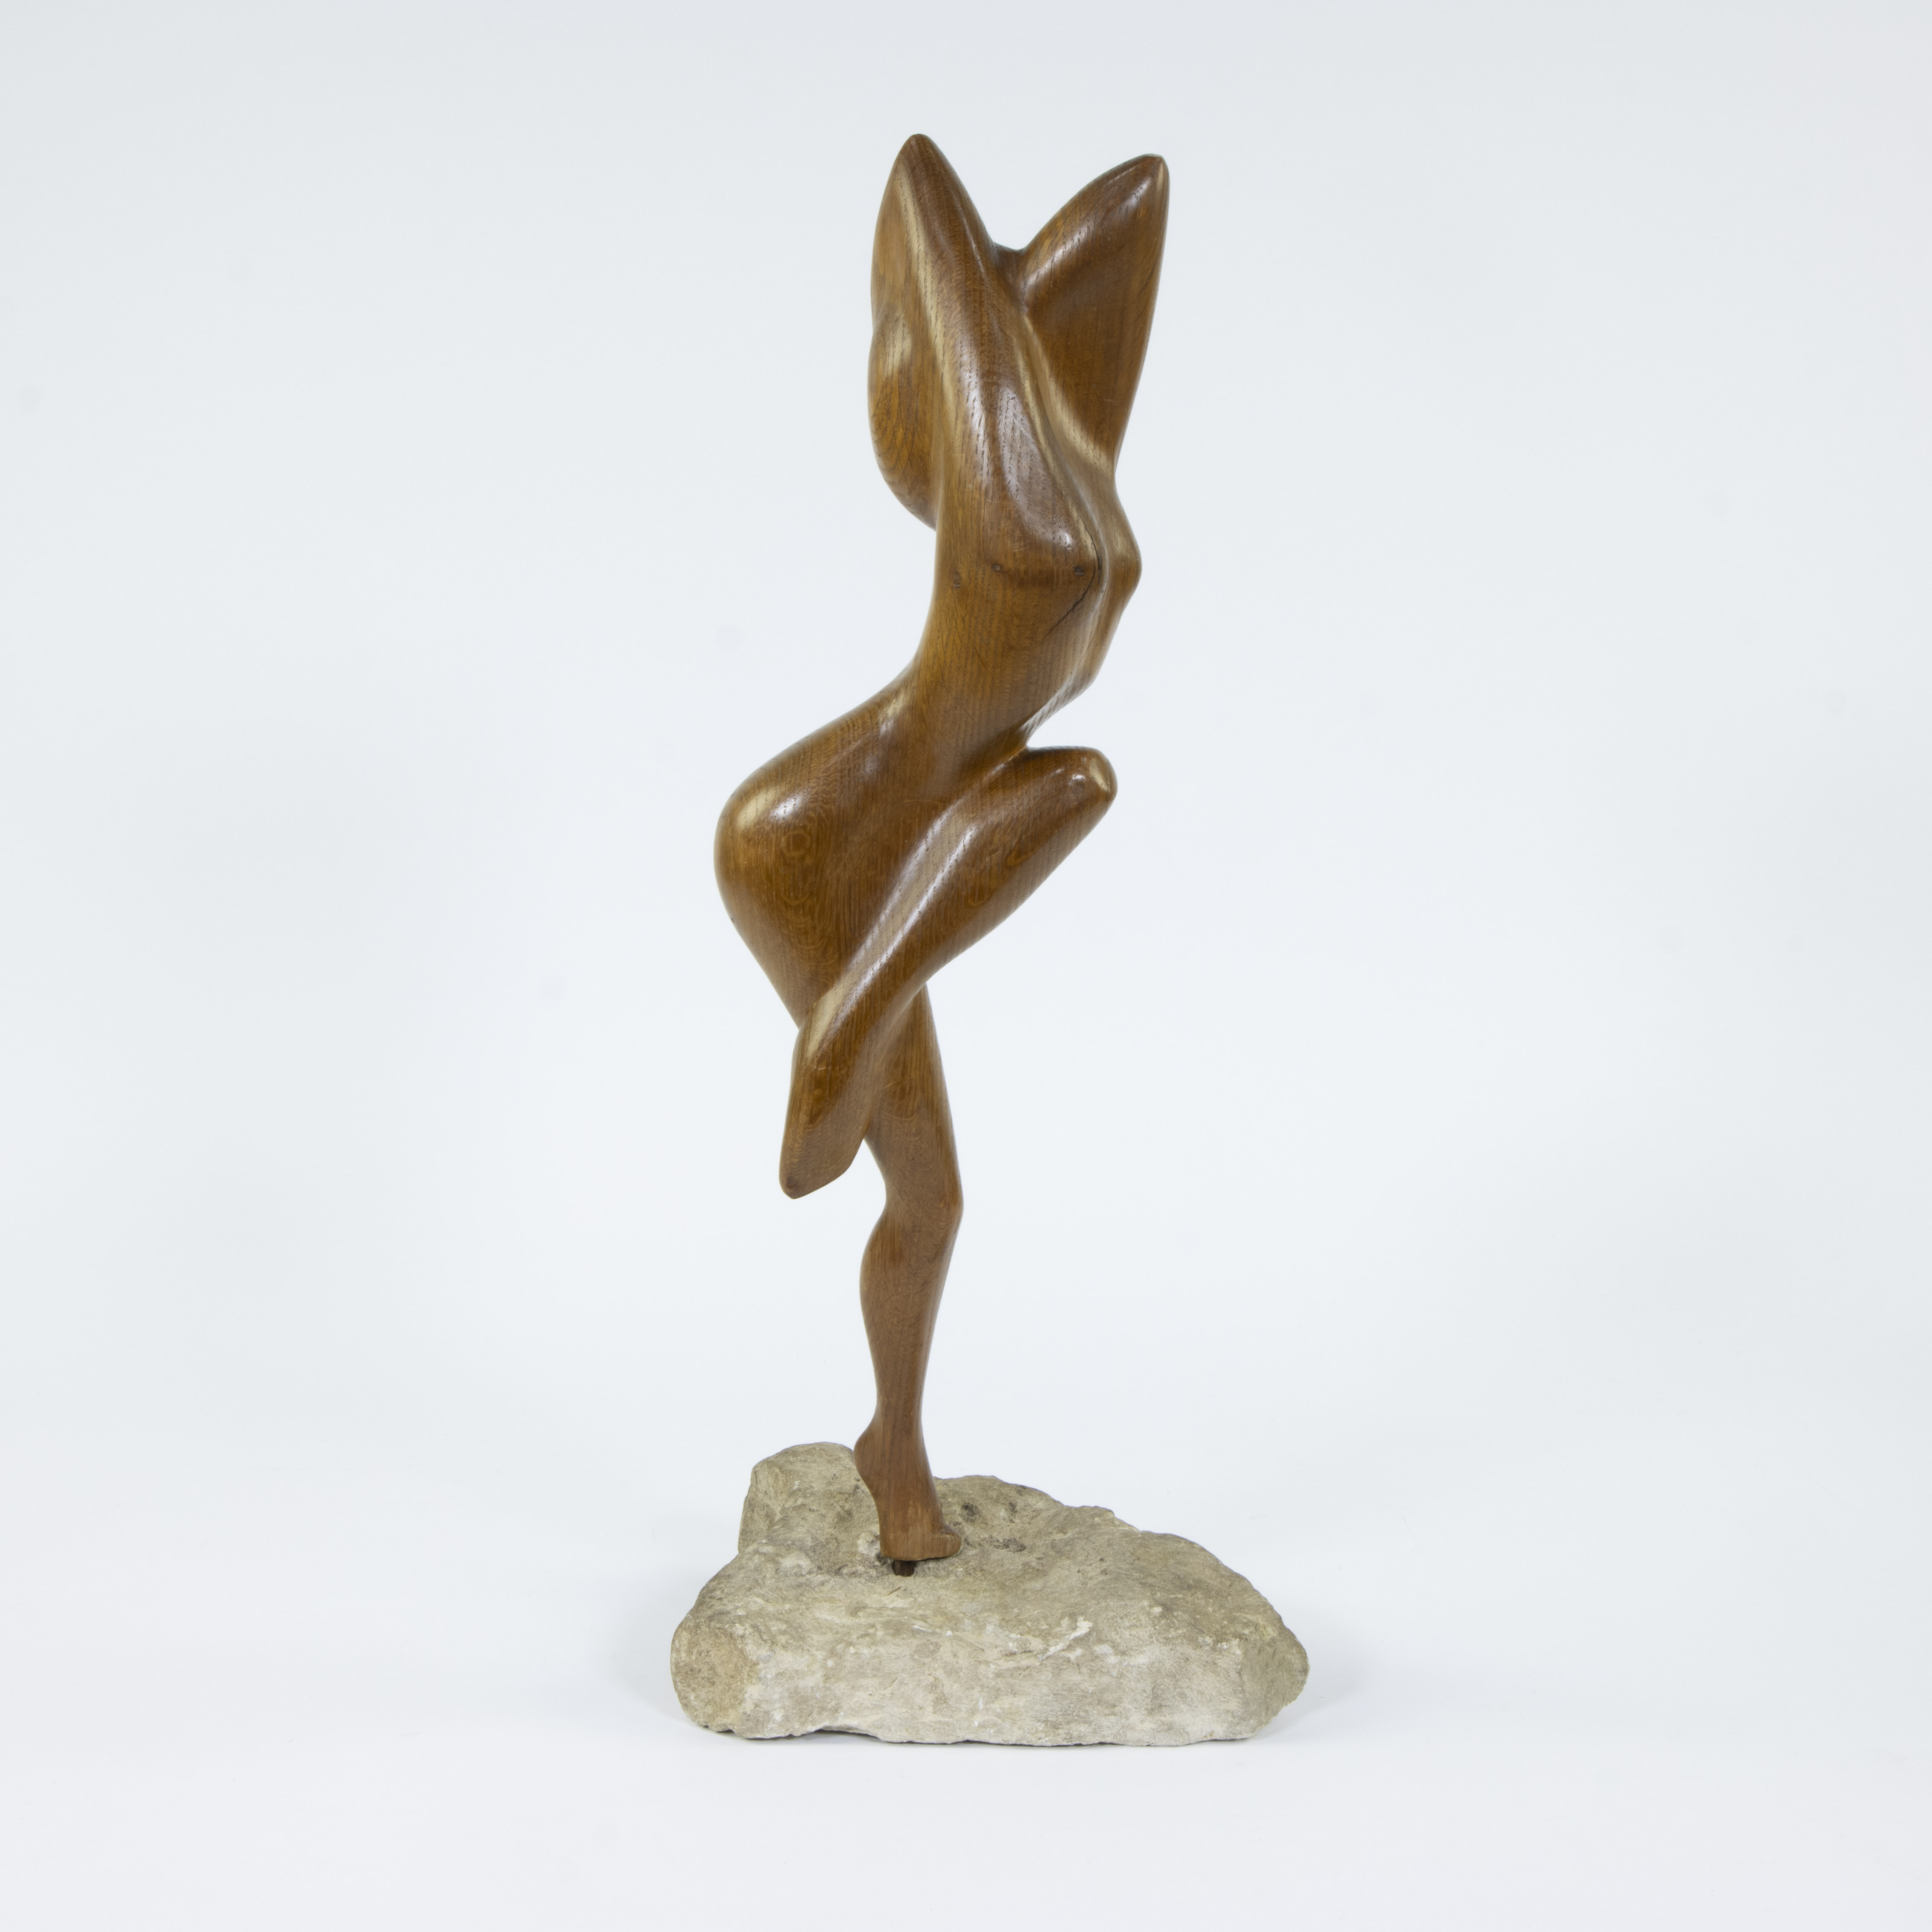 Wooden sculpture of a nude on stone plinth, signed Vermeulen and dated '70 - Image 3 of 5